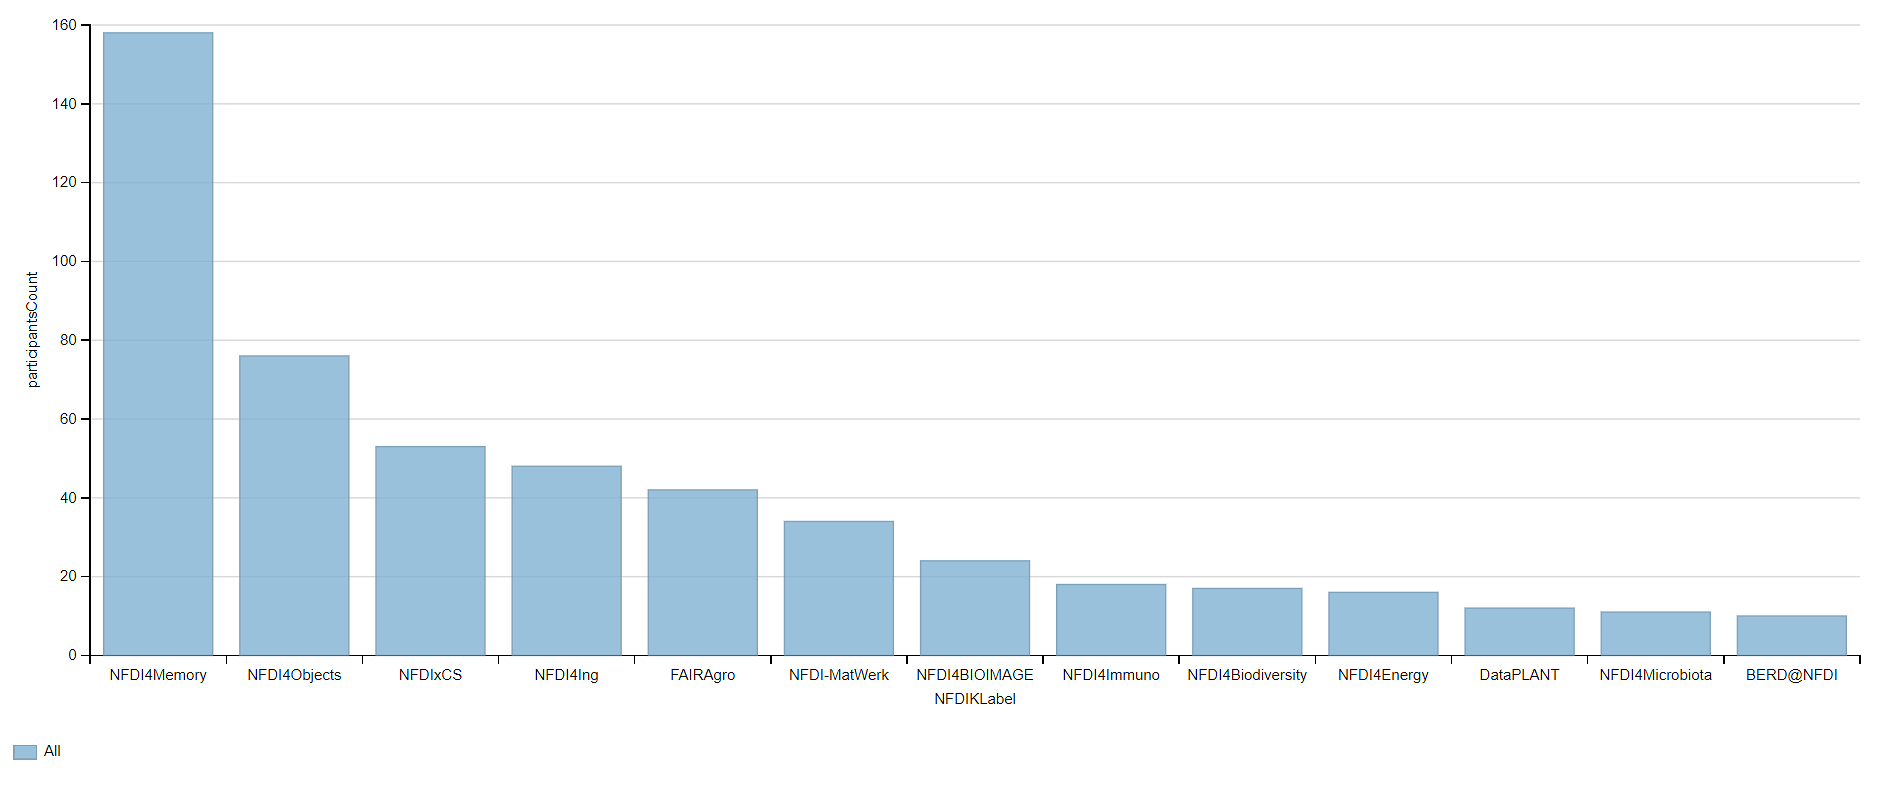 Number of participants in NFDI consortia visualized as bar chart